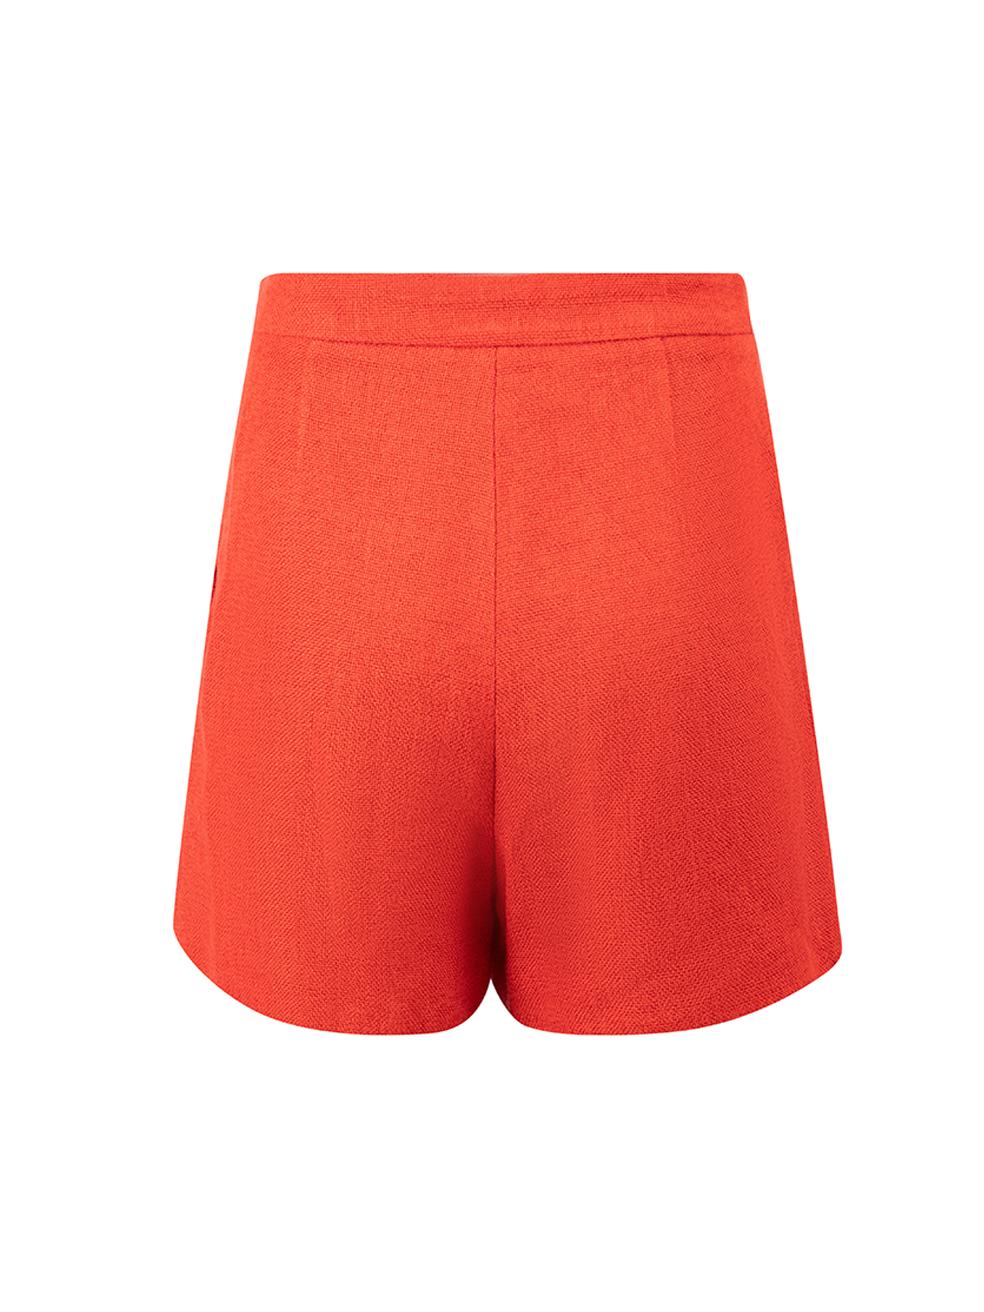 Giambattista Valli Women's Red Woven High Rise Shorts In Good Condition For Sale In London, GB